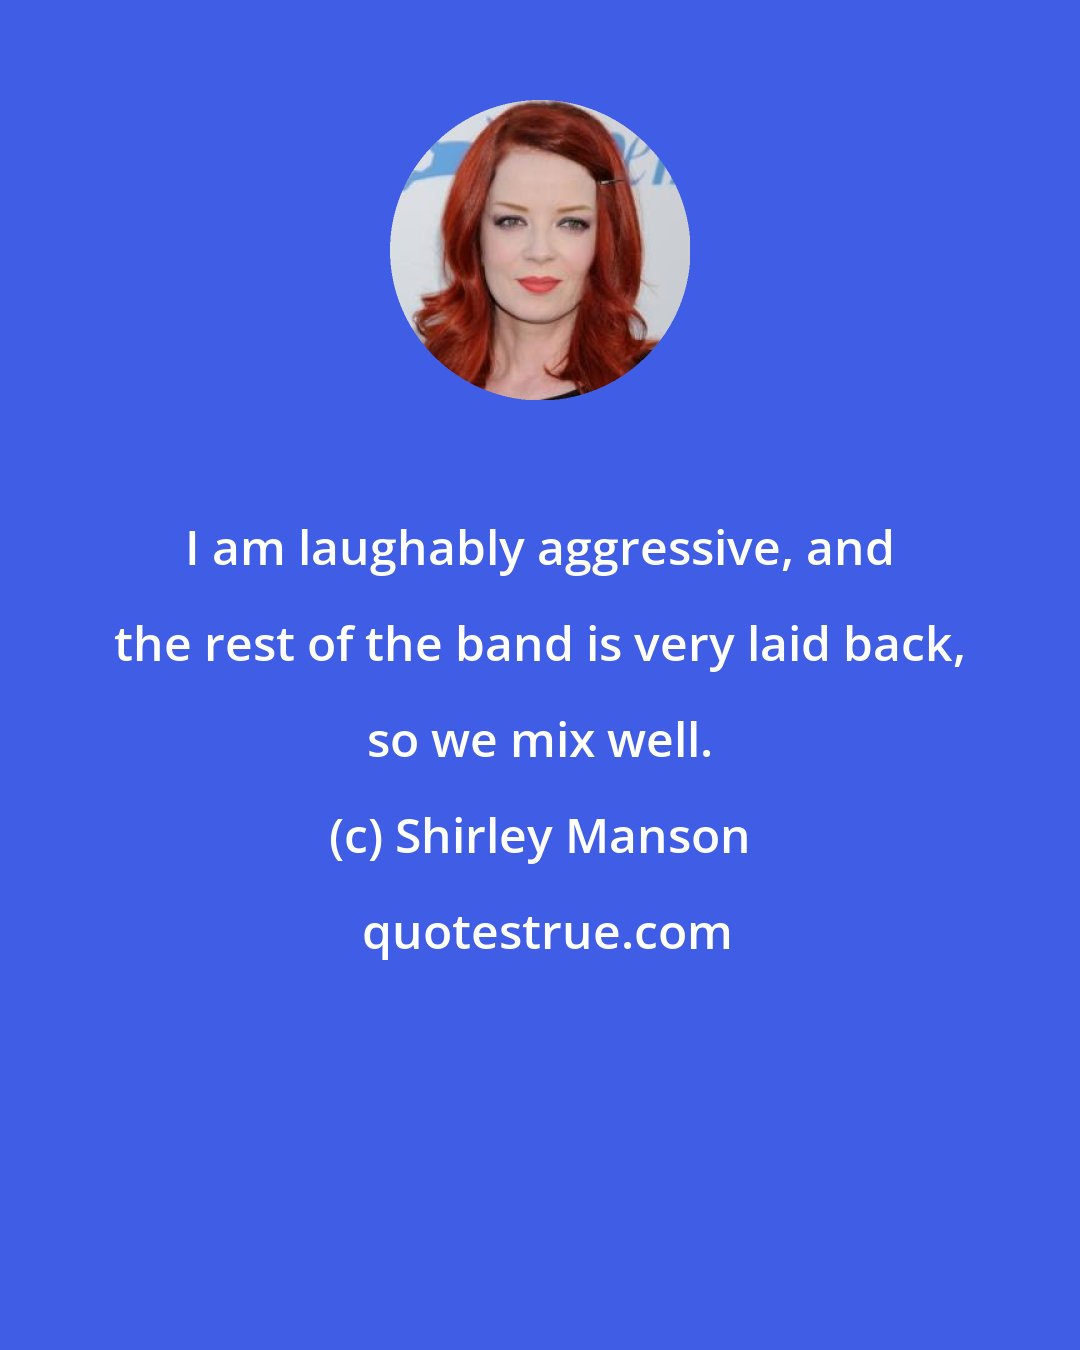 Shirley Manson: I am laughably aggressive, and the rest of the band is very laid back, so we mix well.